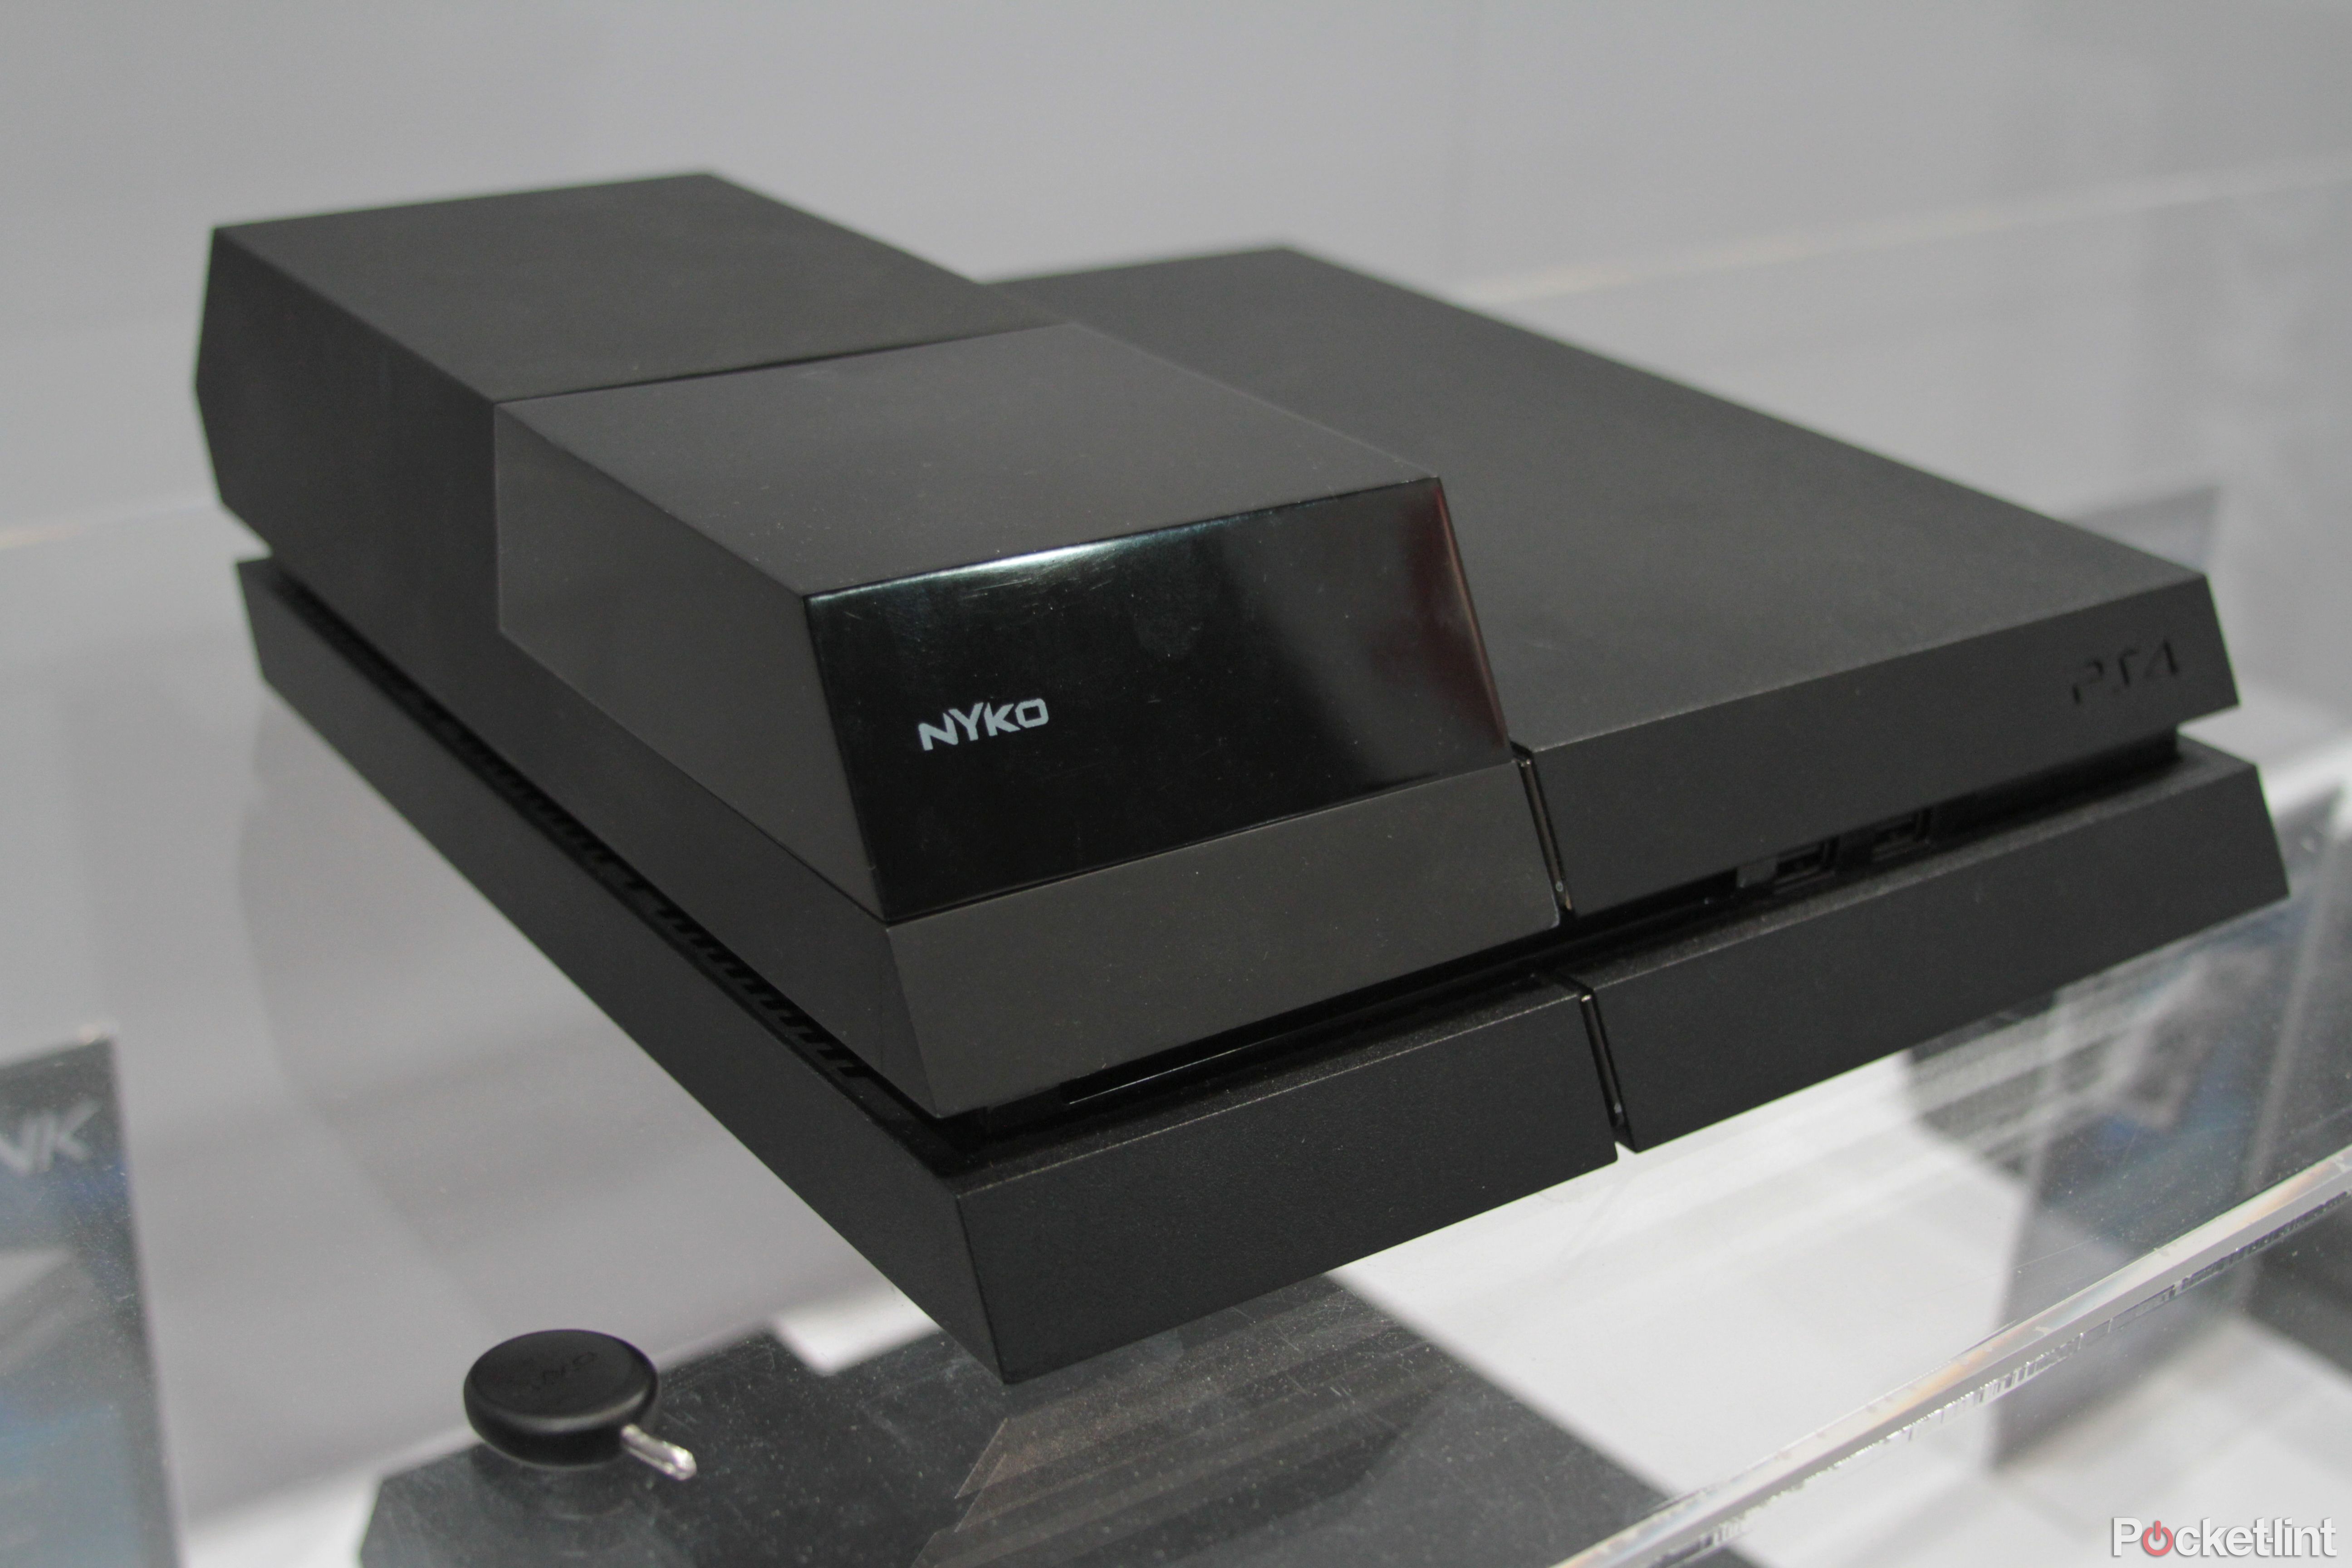 nyko data bank and type pad could dramatically improve your ps4 eyes on  image 1